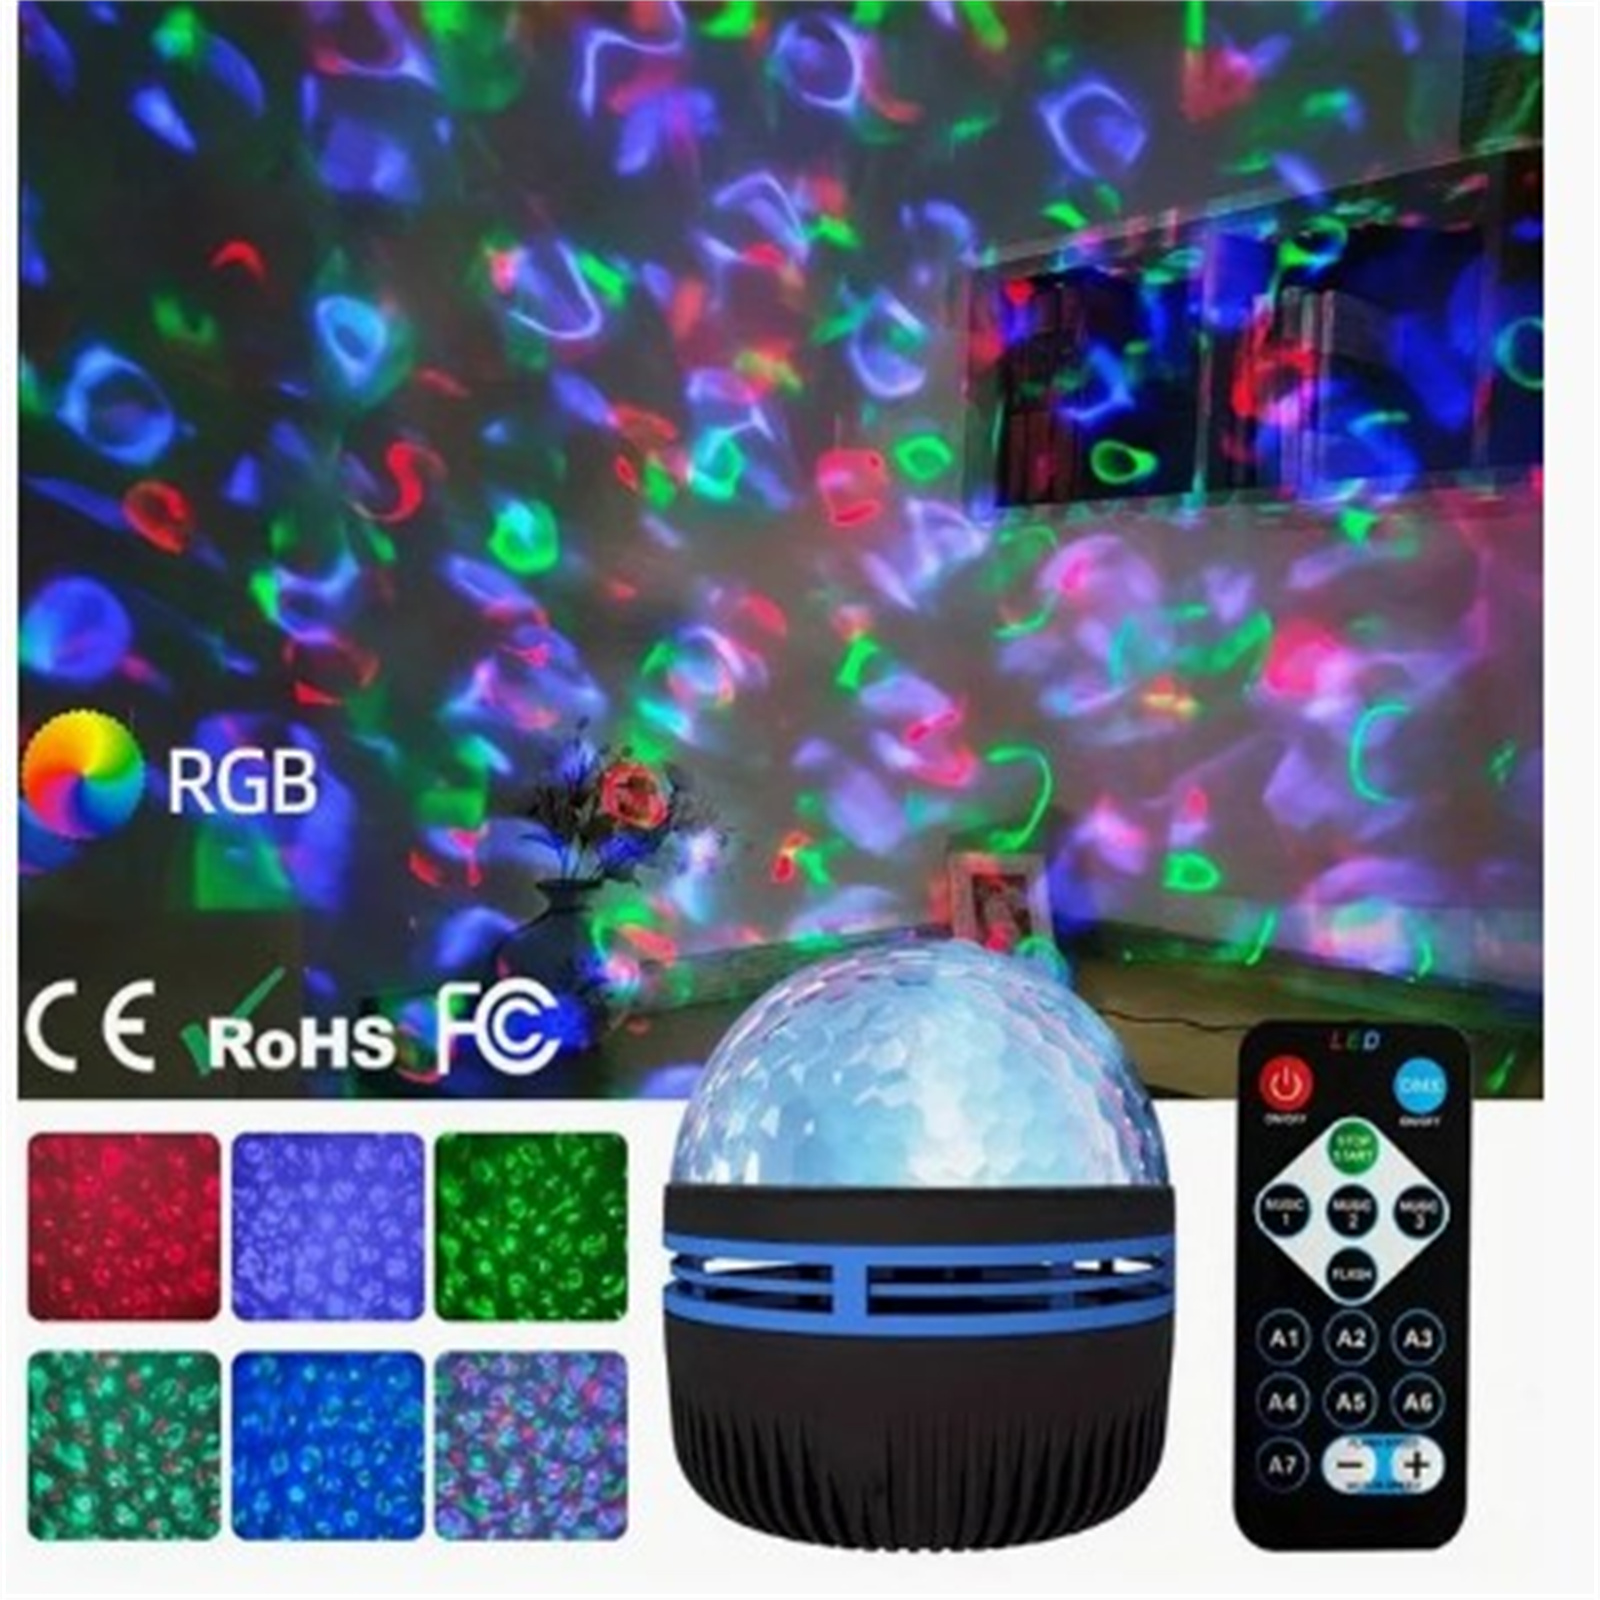 LED Starry Sky Projector Lights With Remote Control Projector Night Light For Home Gaming Bedroom Kids Room Decor